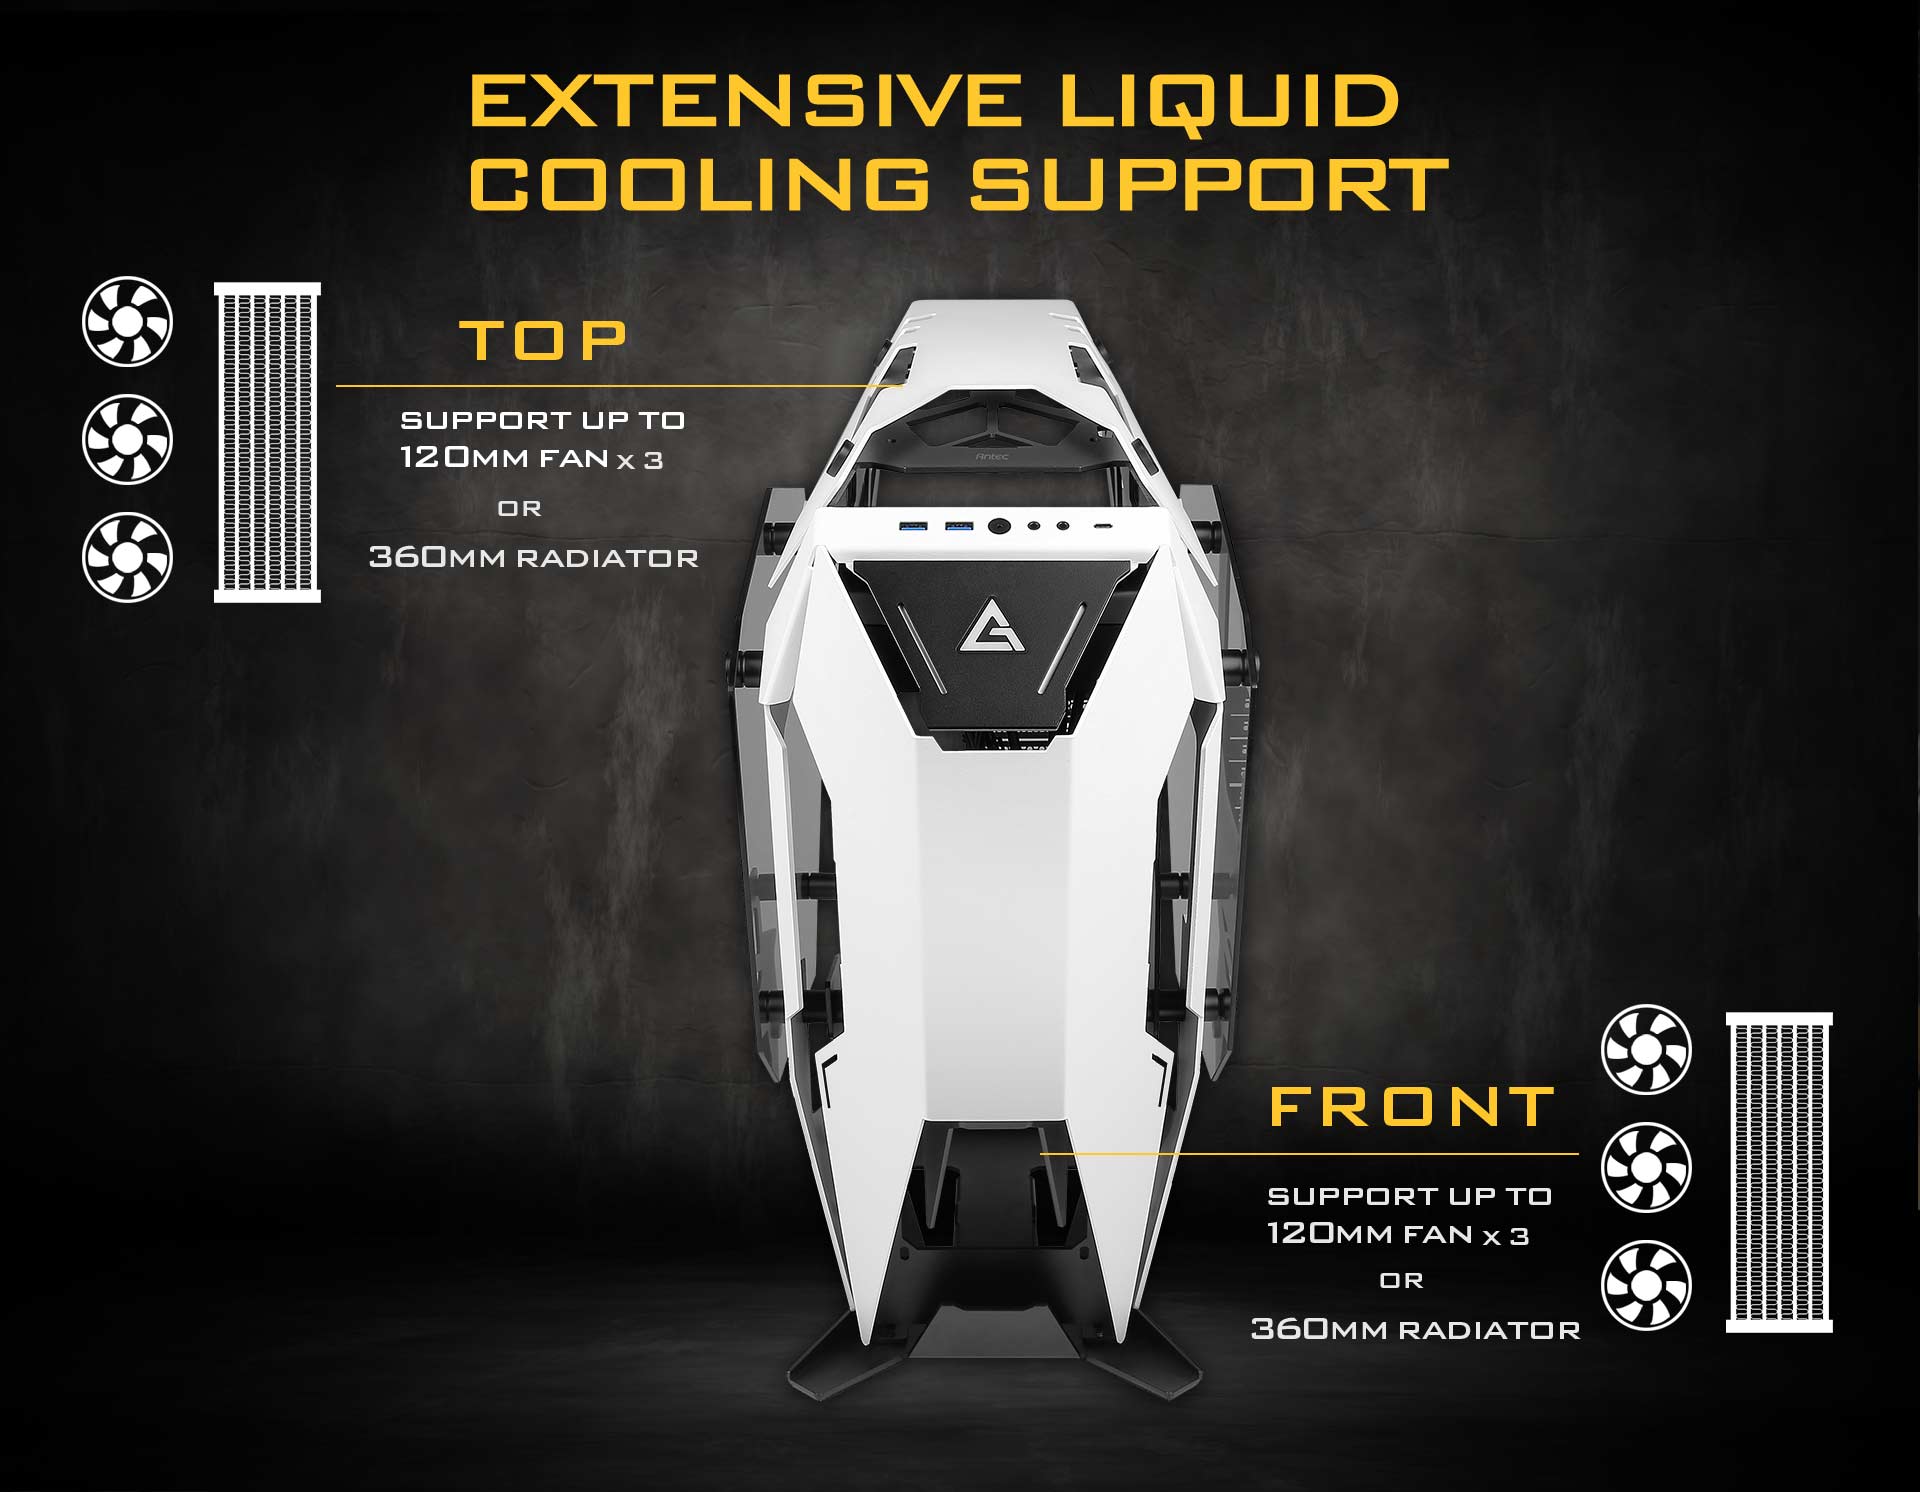 Antec Torque Facing Forward with a header that reads: EXTENSIVE LIQUID COOLING SUPPORT - There are also graphics and text that indicate up to three 120mm fans or a 360mm radiator on and up to three 120mm fans or a 360mm radiator can be installed in front